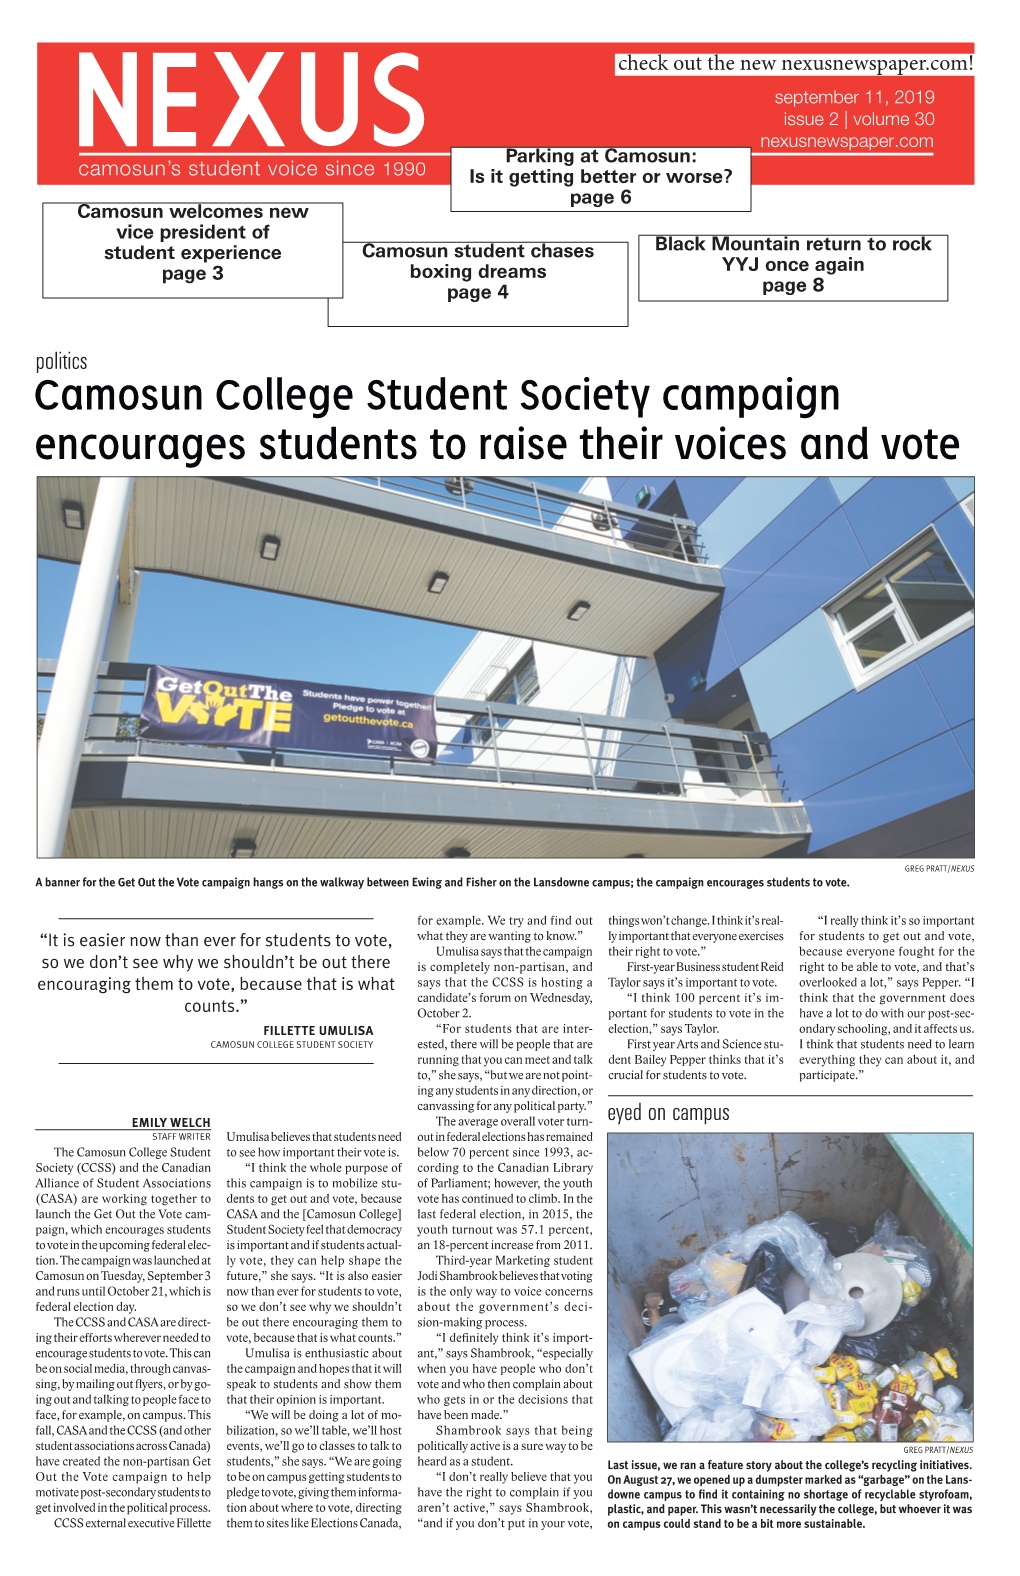 Camosun College Student Society Campaign Encourages Students to Raise Their Voices and Vote